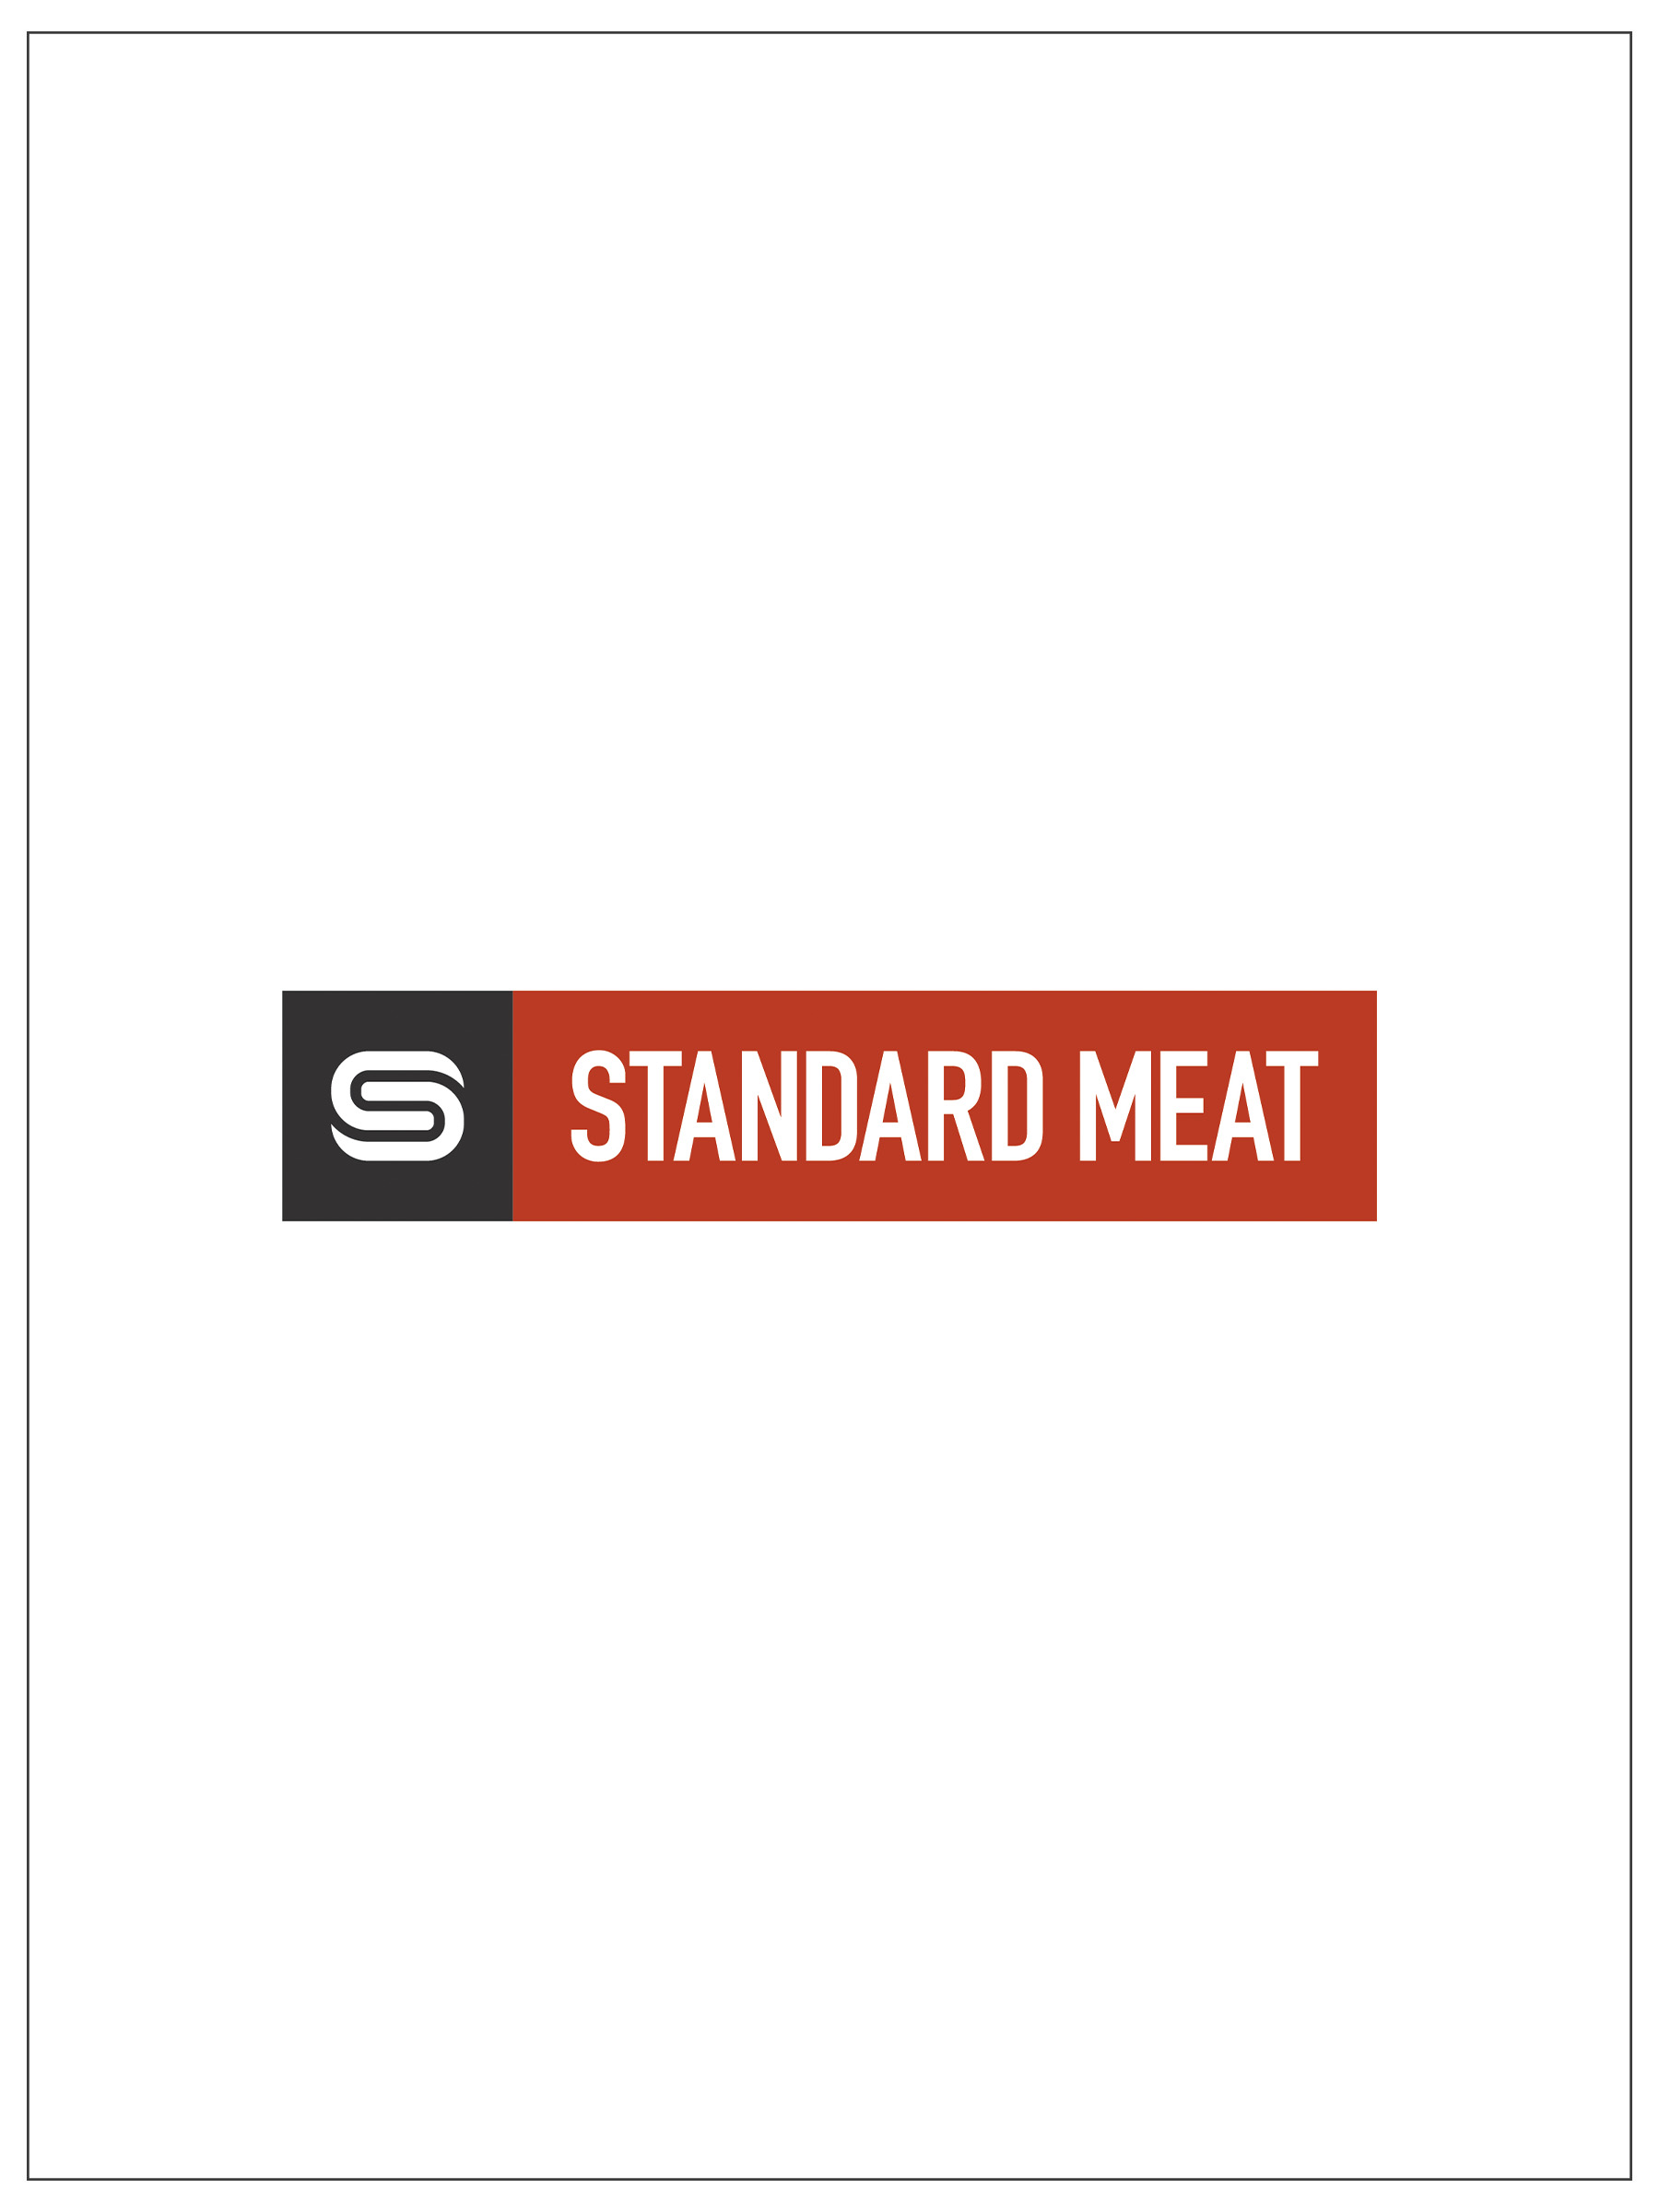 Standard Meat Ad